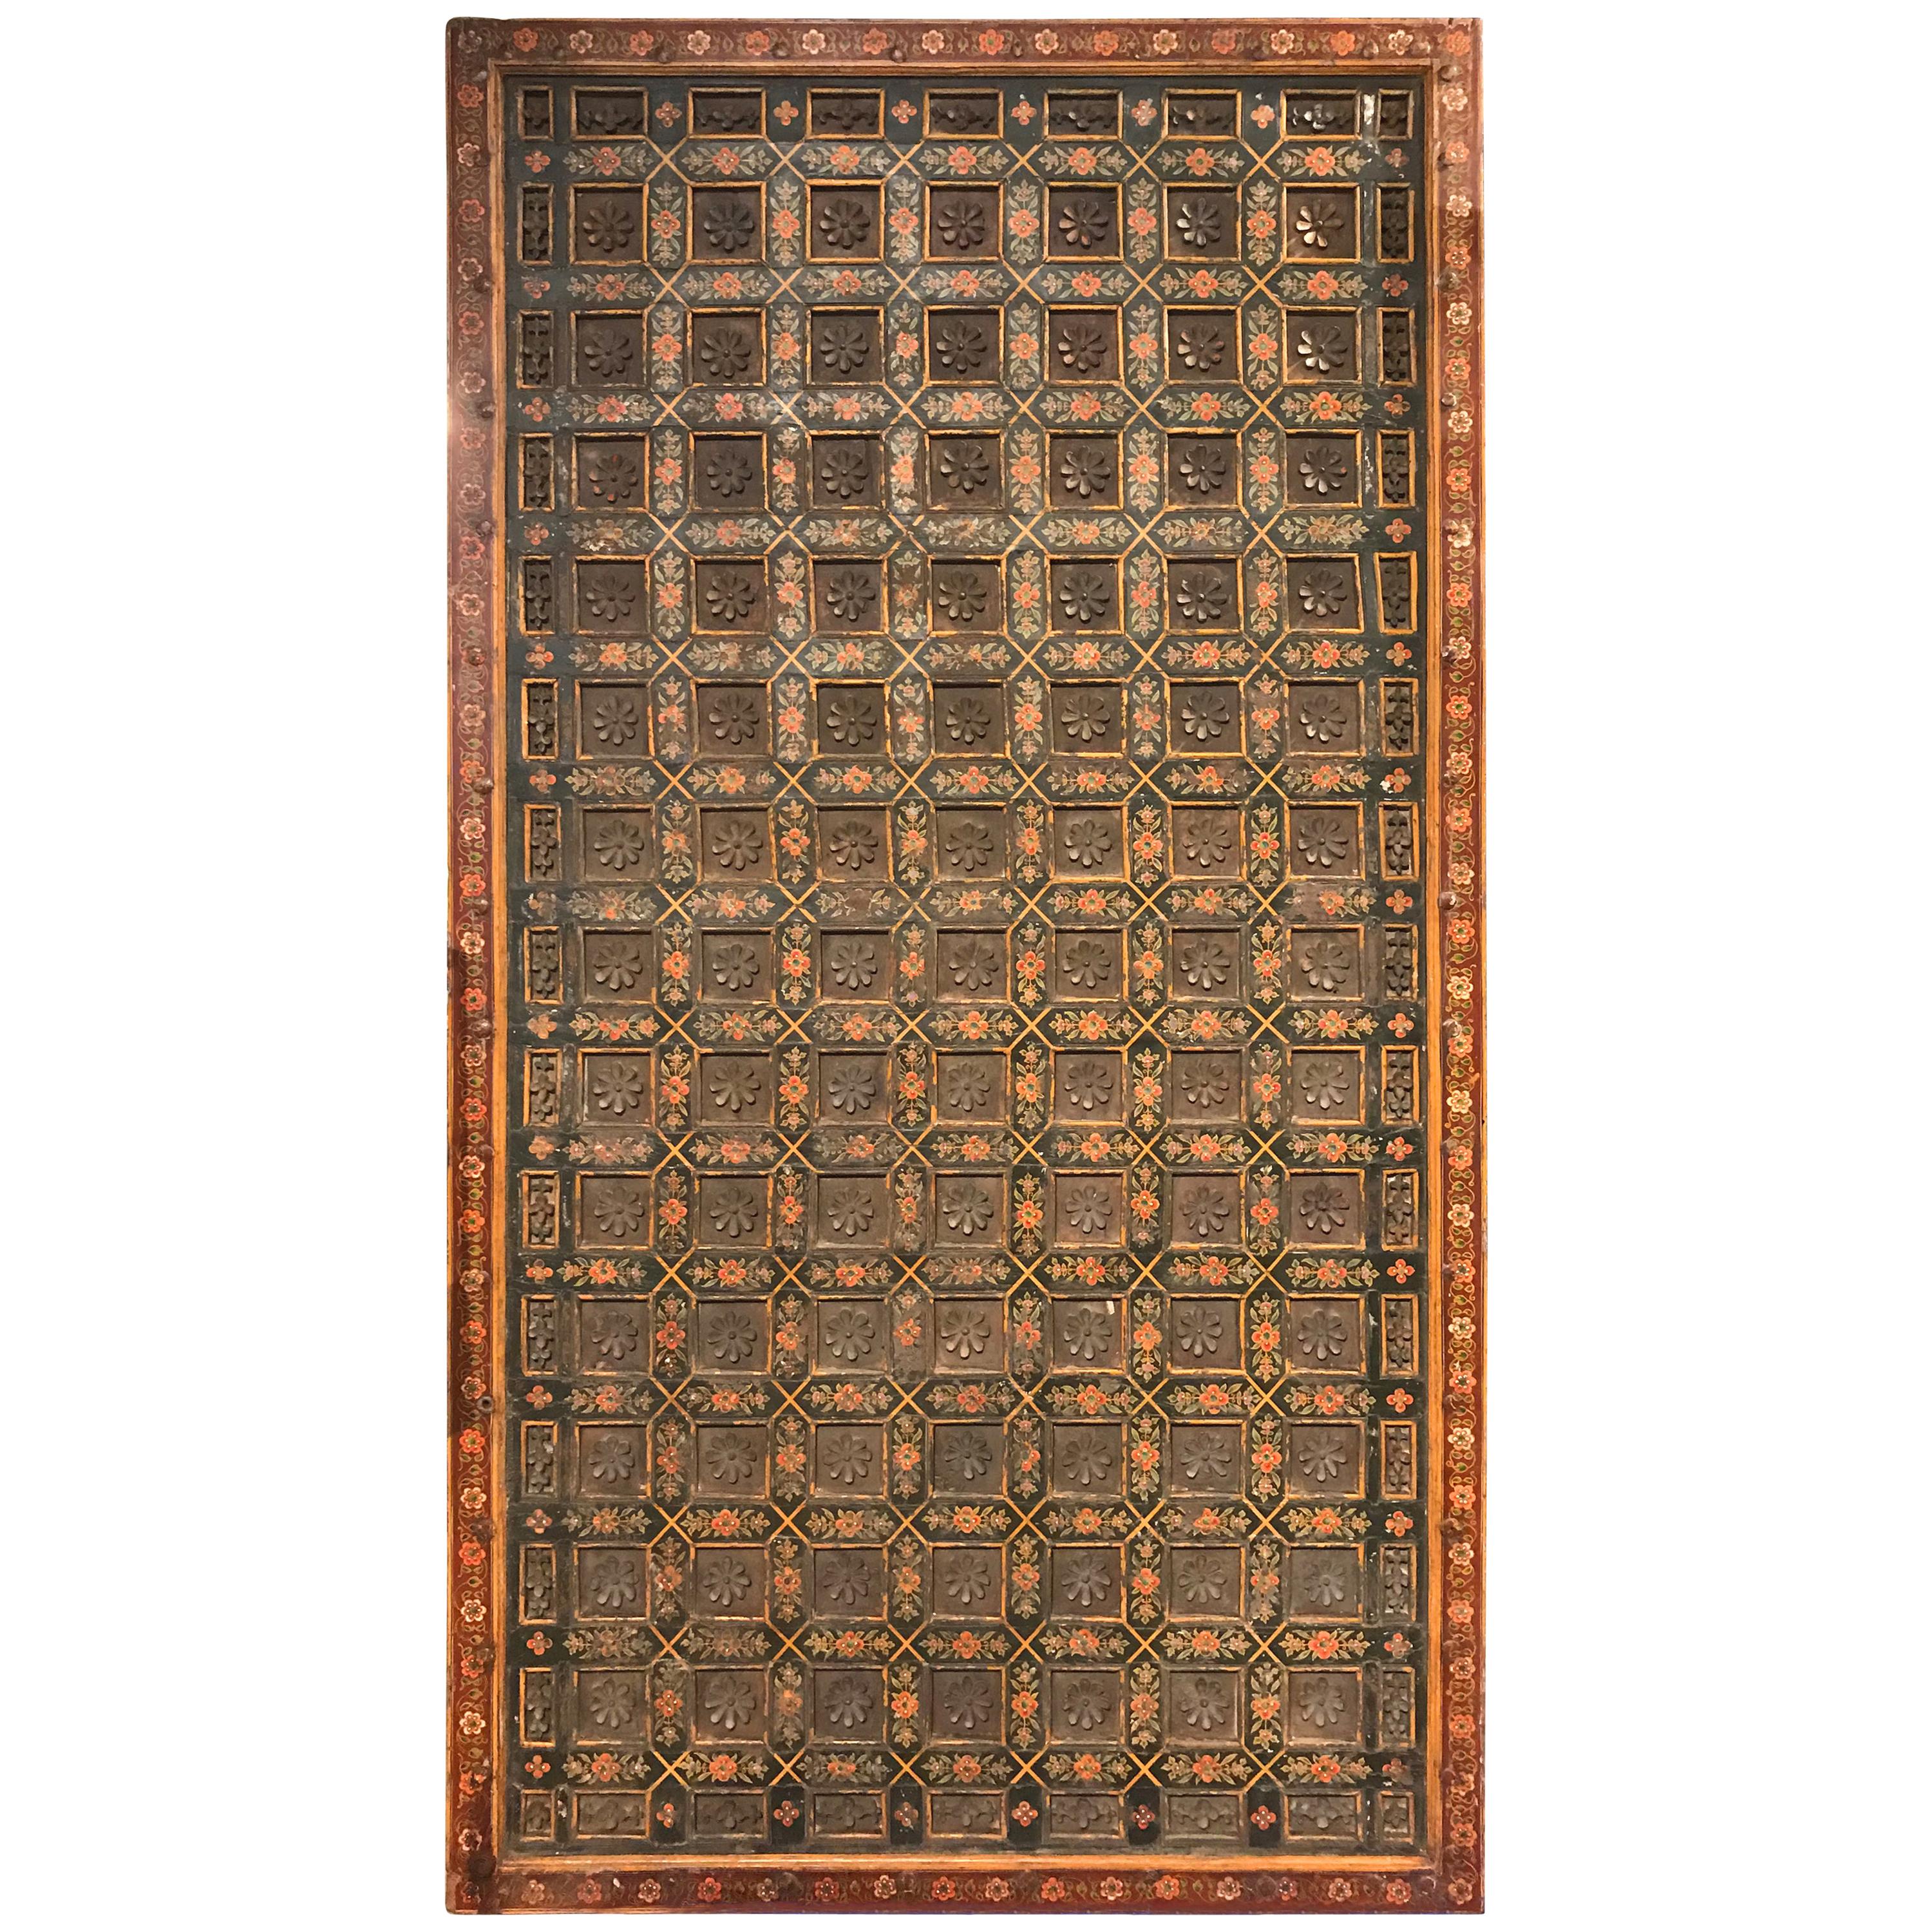 Indian Polychrome Carved Architectural Ceiling Panel with Lotus Blossoms